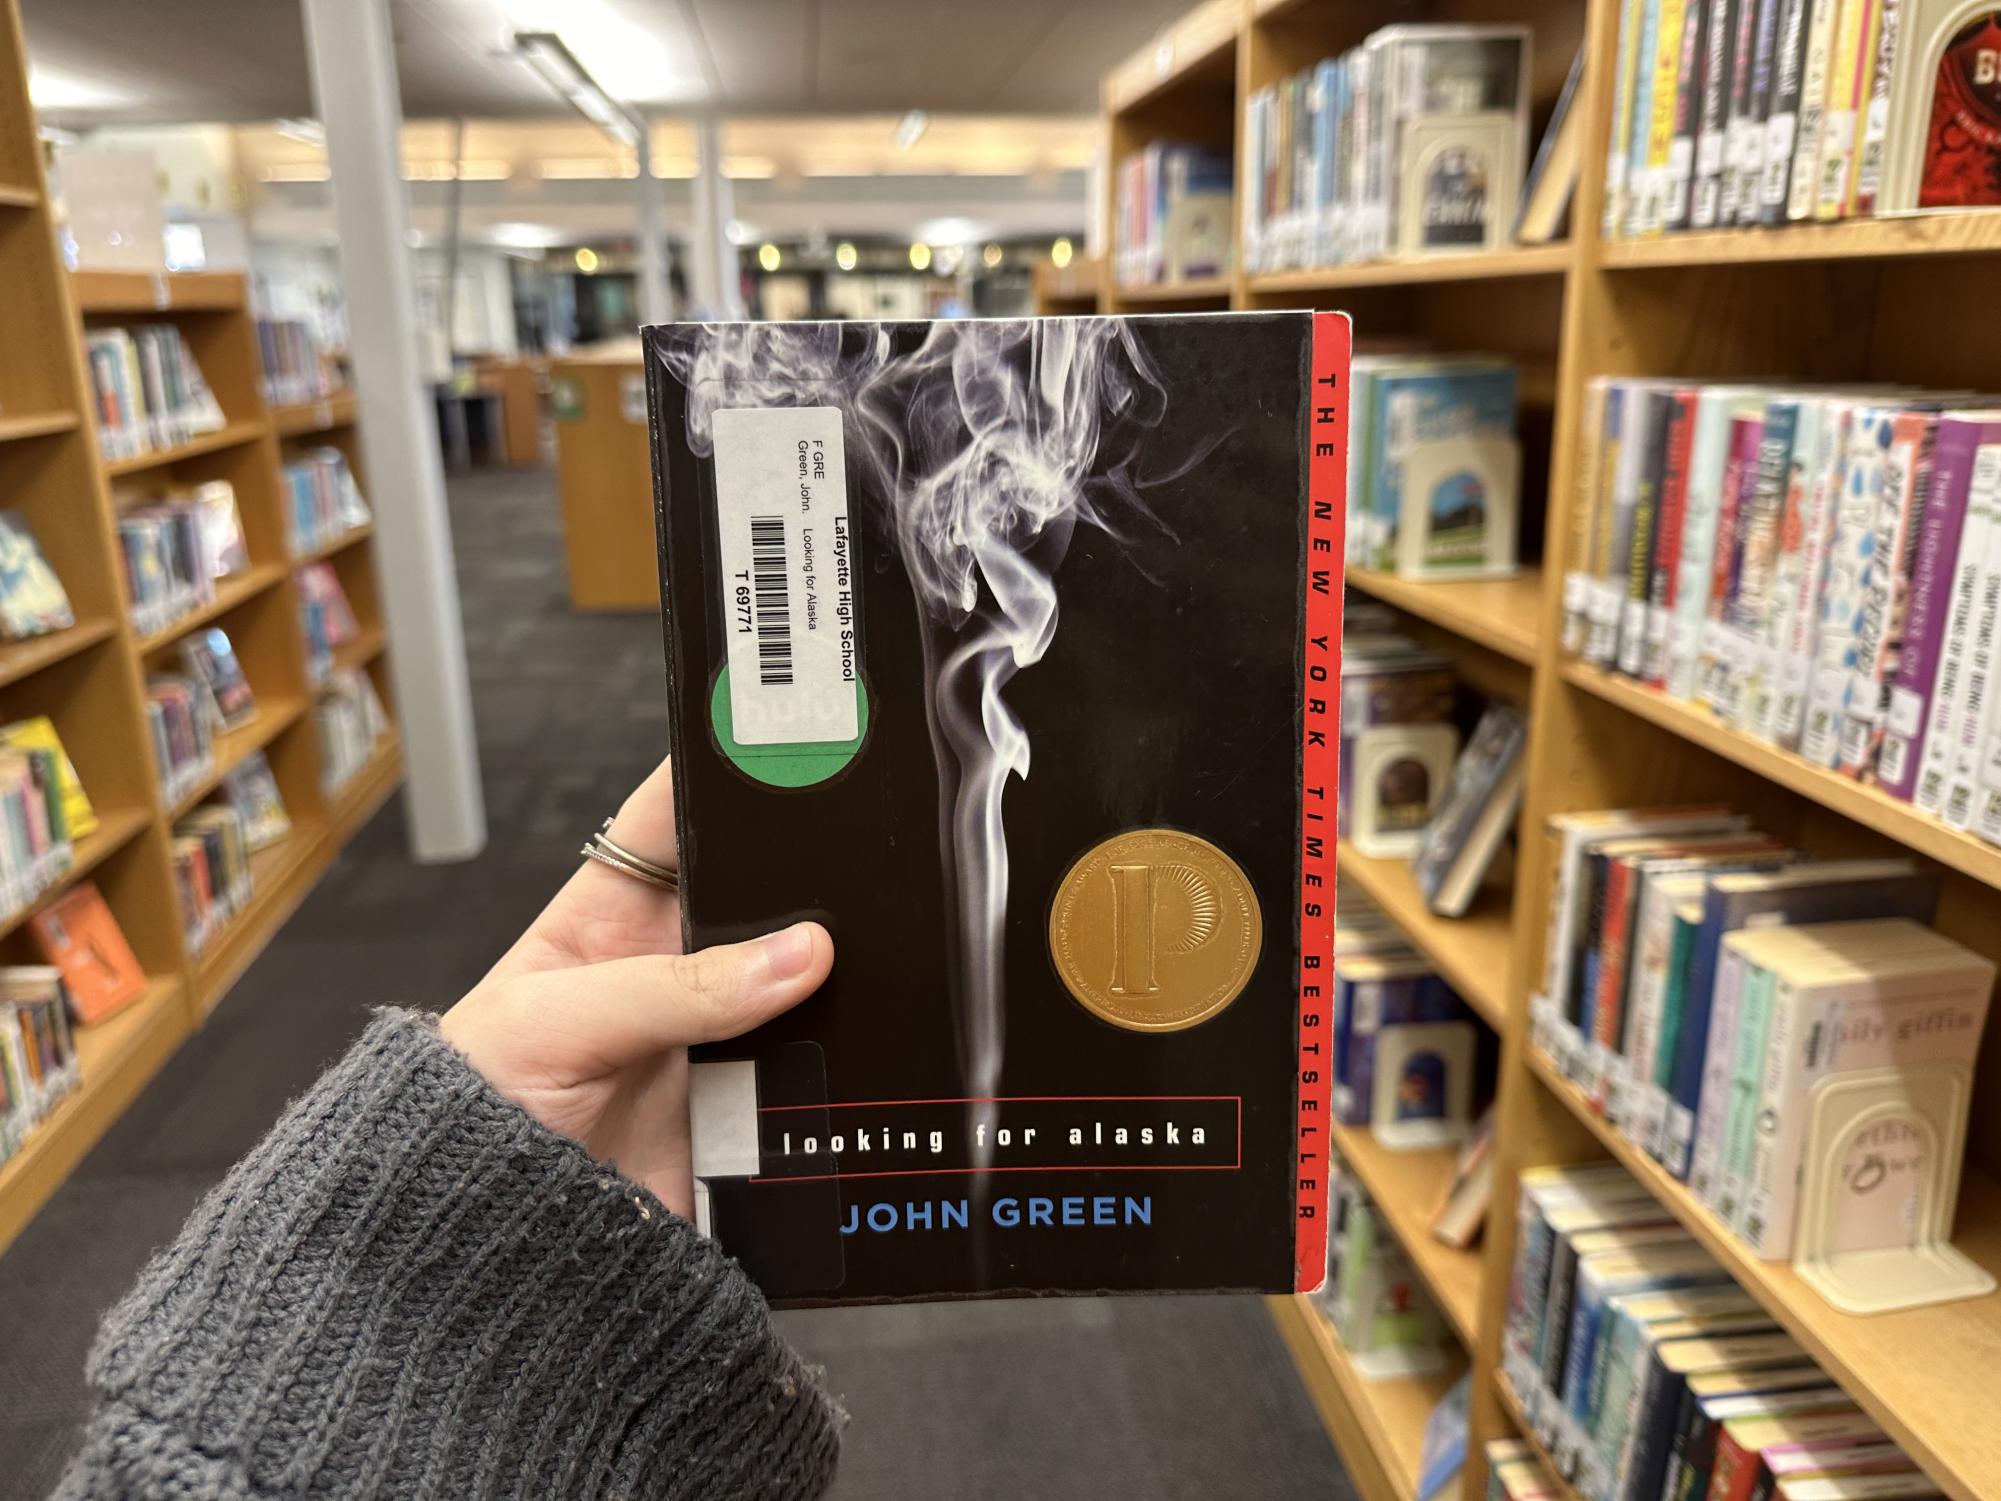 Lafayettes Library has four copies of Looking for Alaska by John Green in. The book is a Michael L. Printz Award winner and The New York Times bestseller.